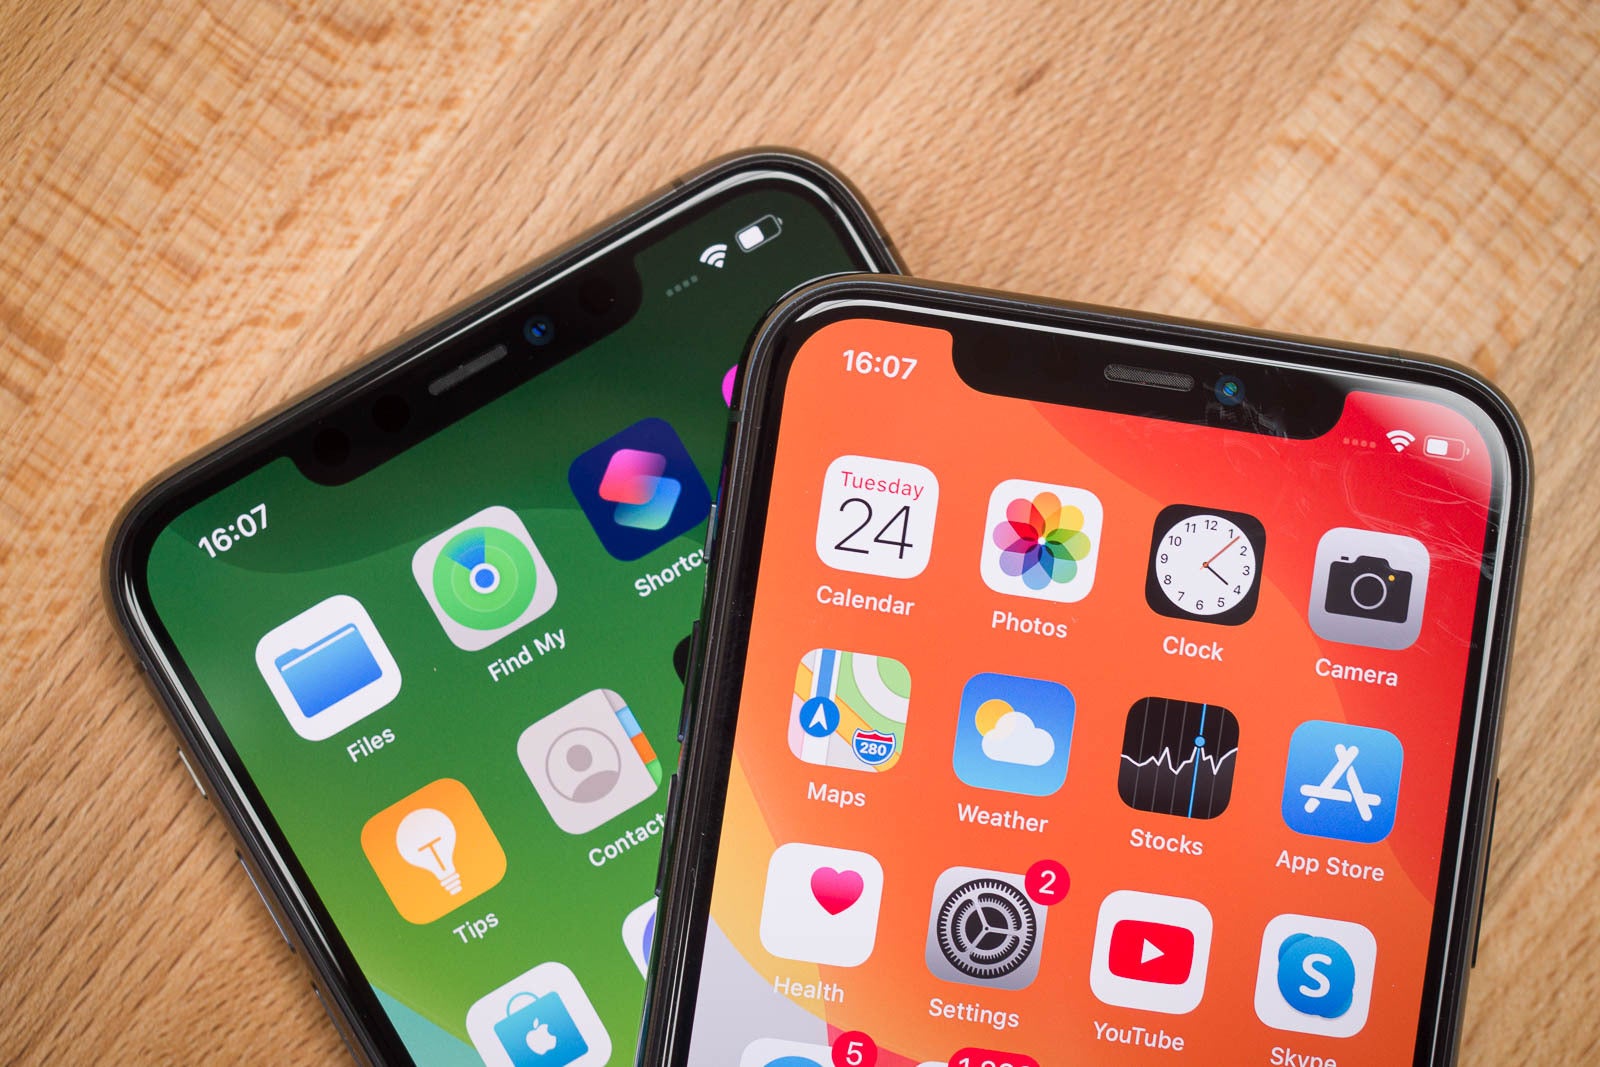 The iPhone 11 Pro notch - iPhone 12 Pro to feature 3D camera but not iPhone 12, iOS 14 code suggests